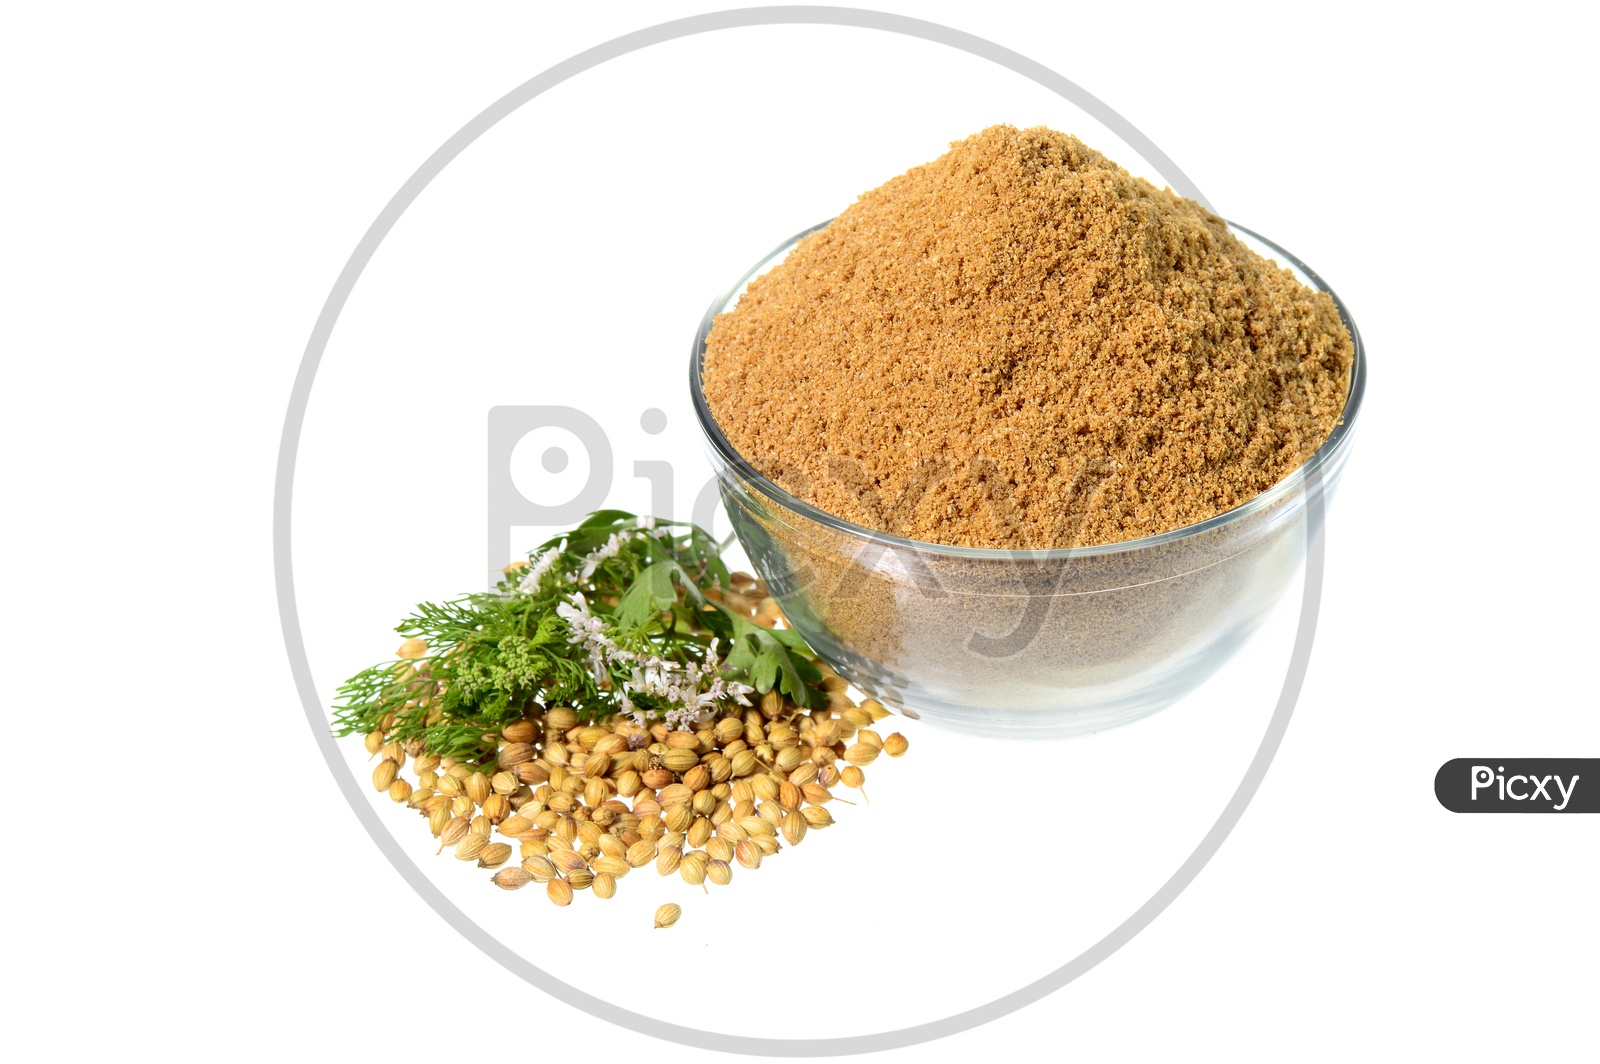 Coriander seeds, Fresh Coriander and Powdered coriander in a  Glass Bowl  On an  Isolated White Background